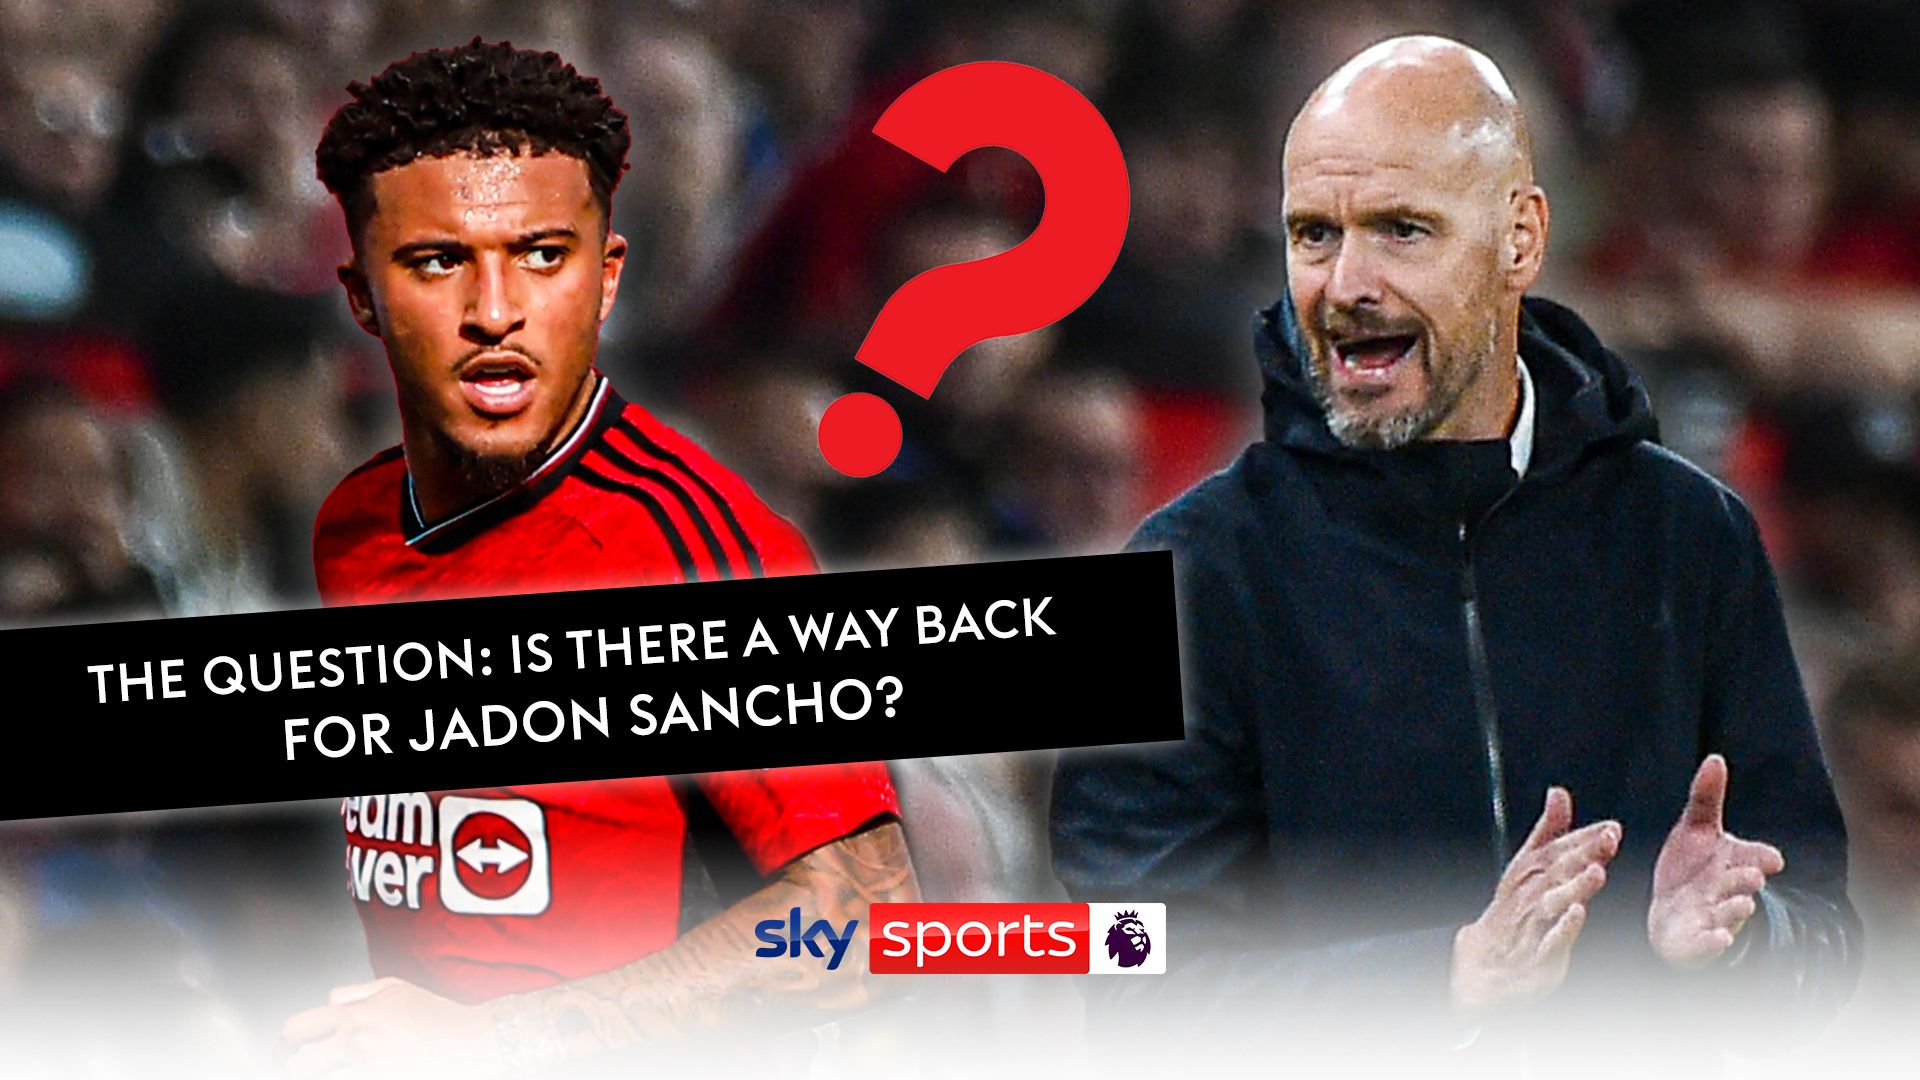 The Question: Is there a way back for Sancho?